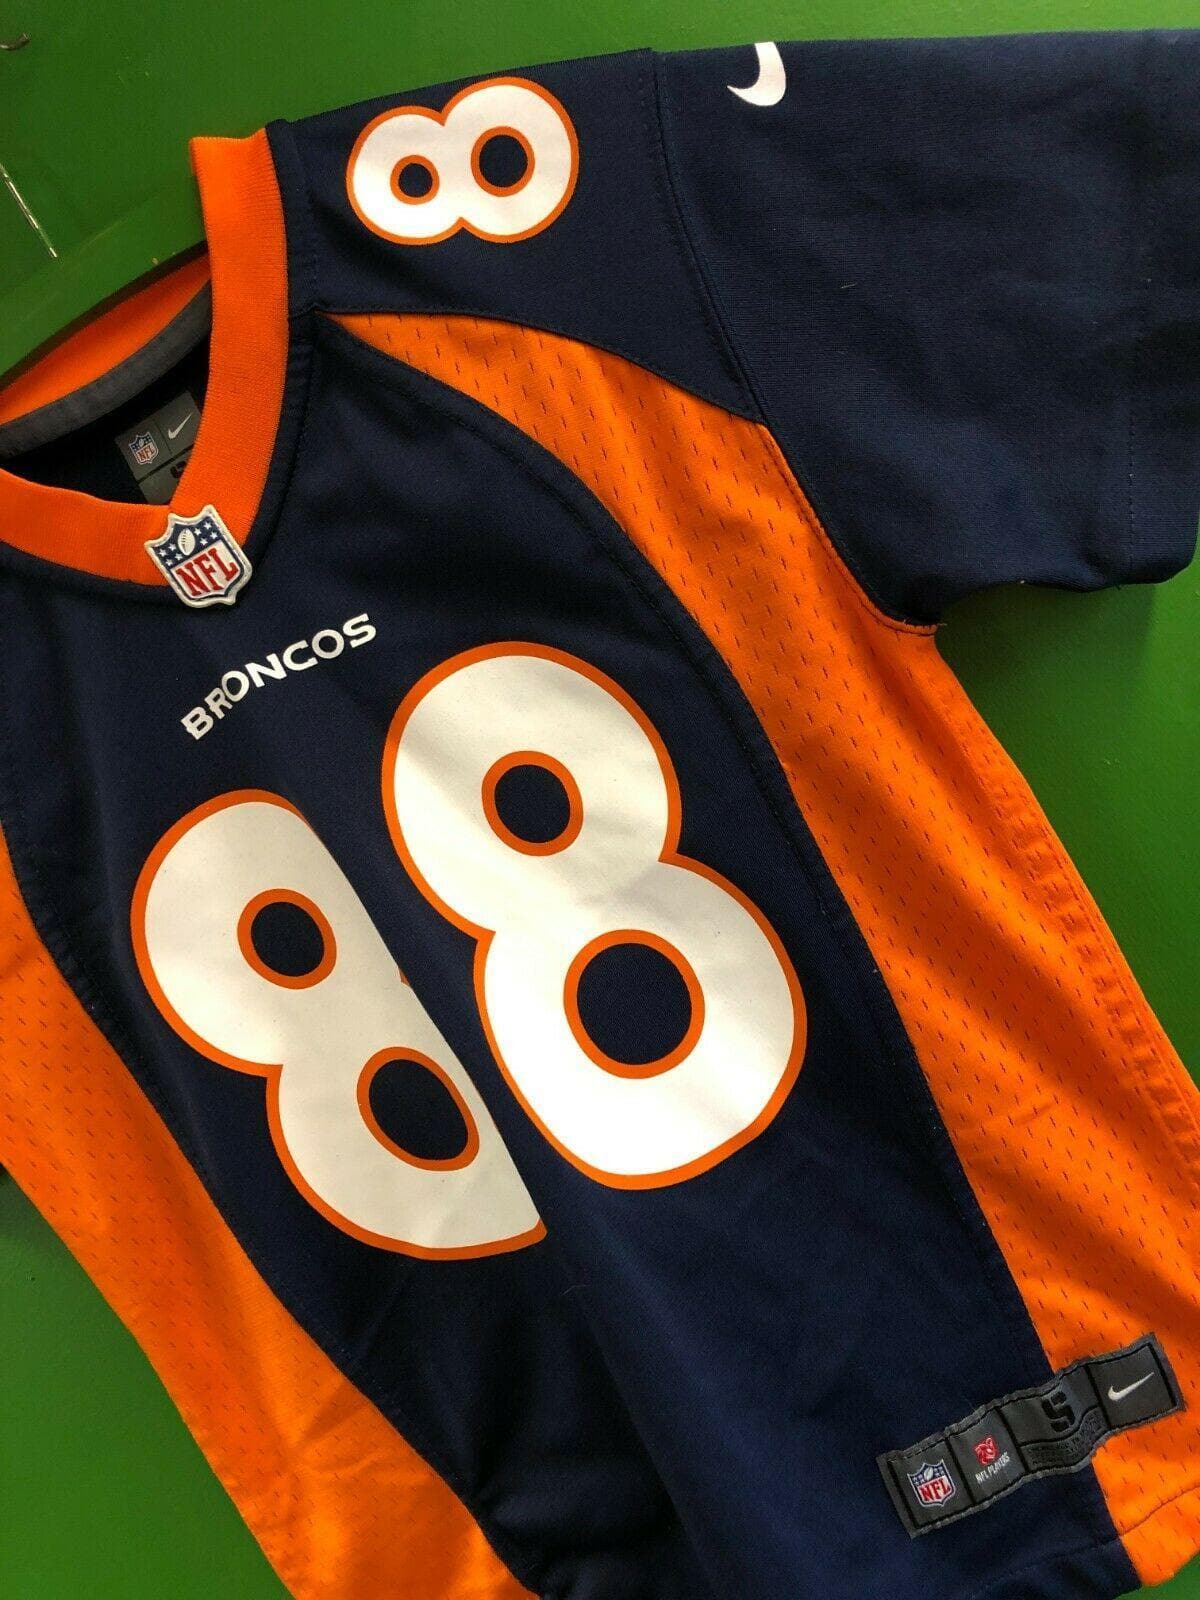 NFL Denver Broncos Demaryius Thomas #88 Game Jersey Youth Small 8